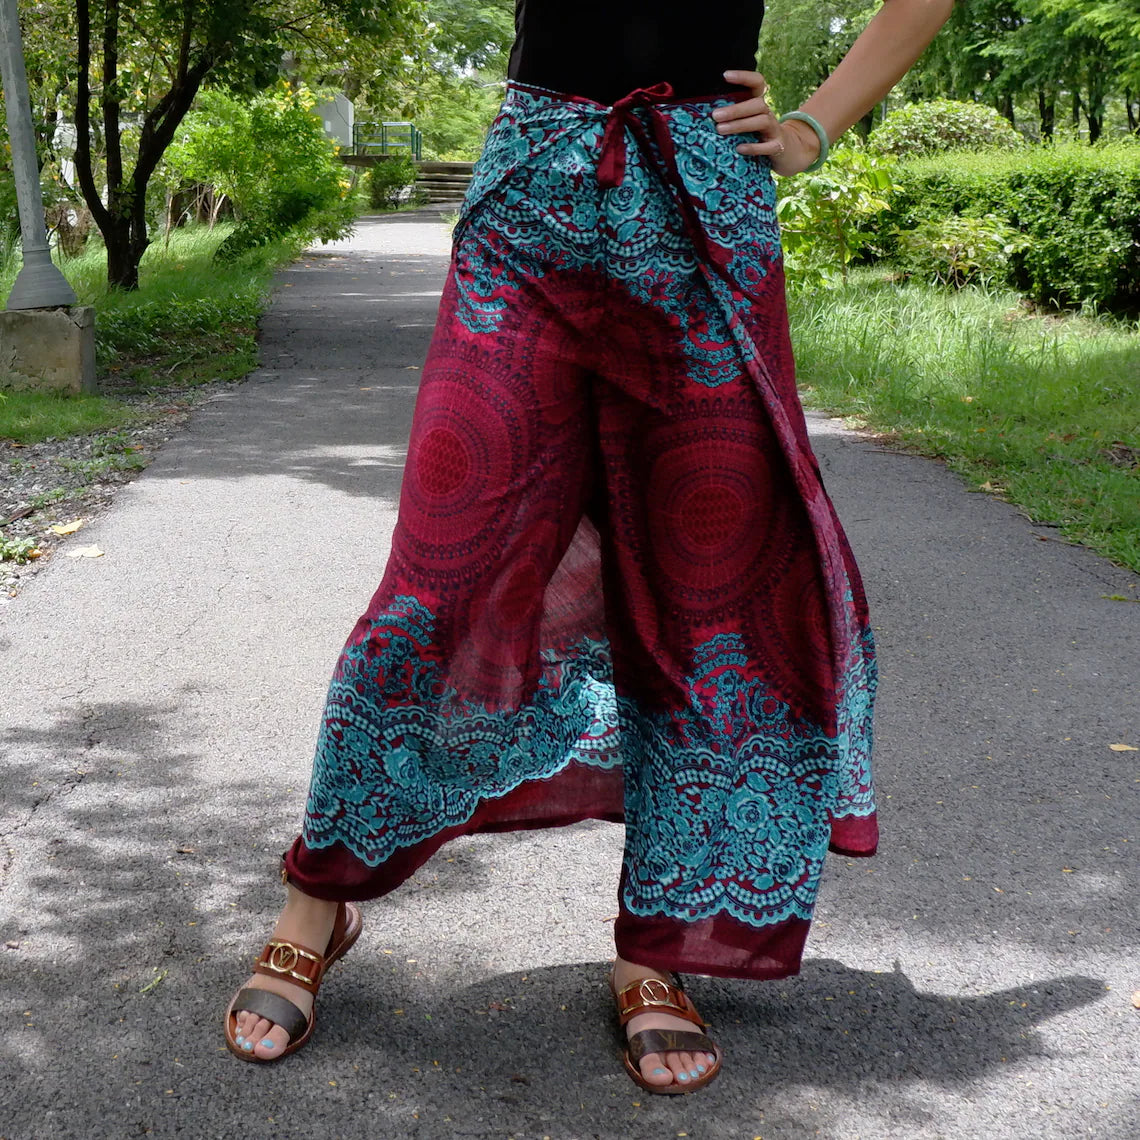 Vibrant boho beach wrap pants with teal and burgundy patterns, black top, and brown sandals in a lush outdoor setting.